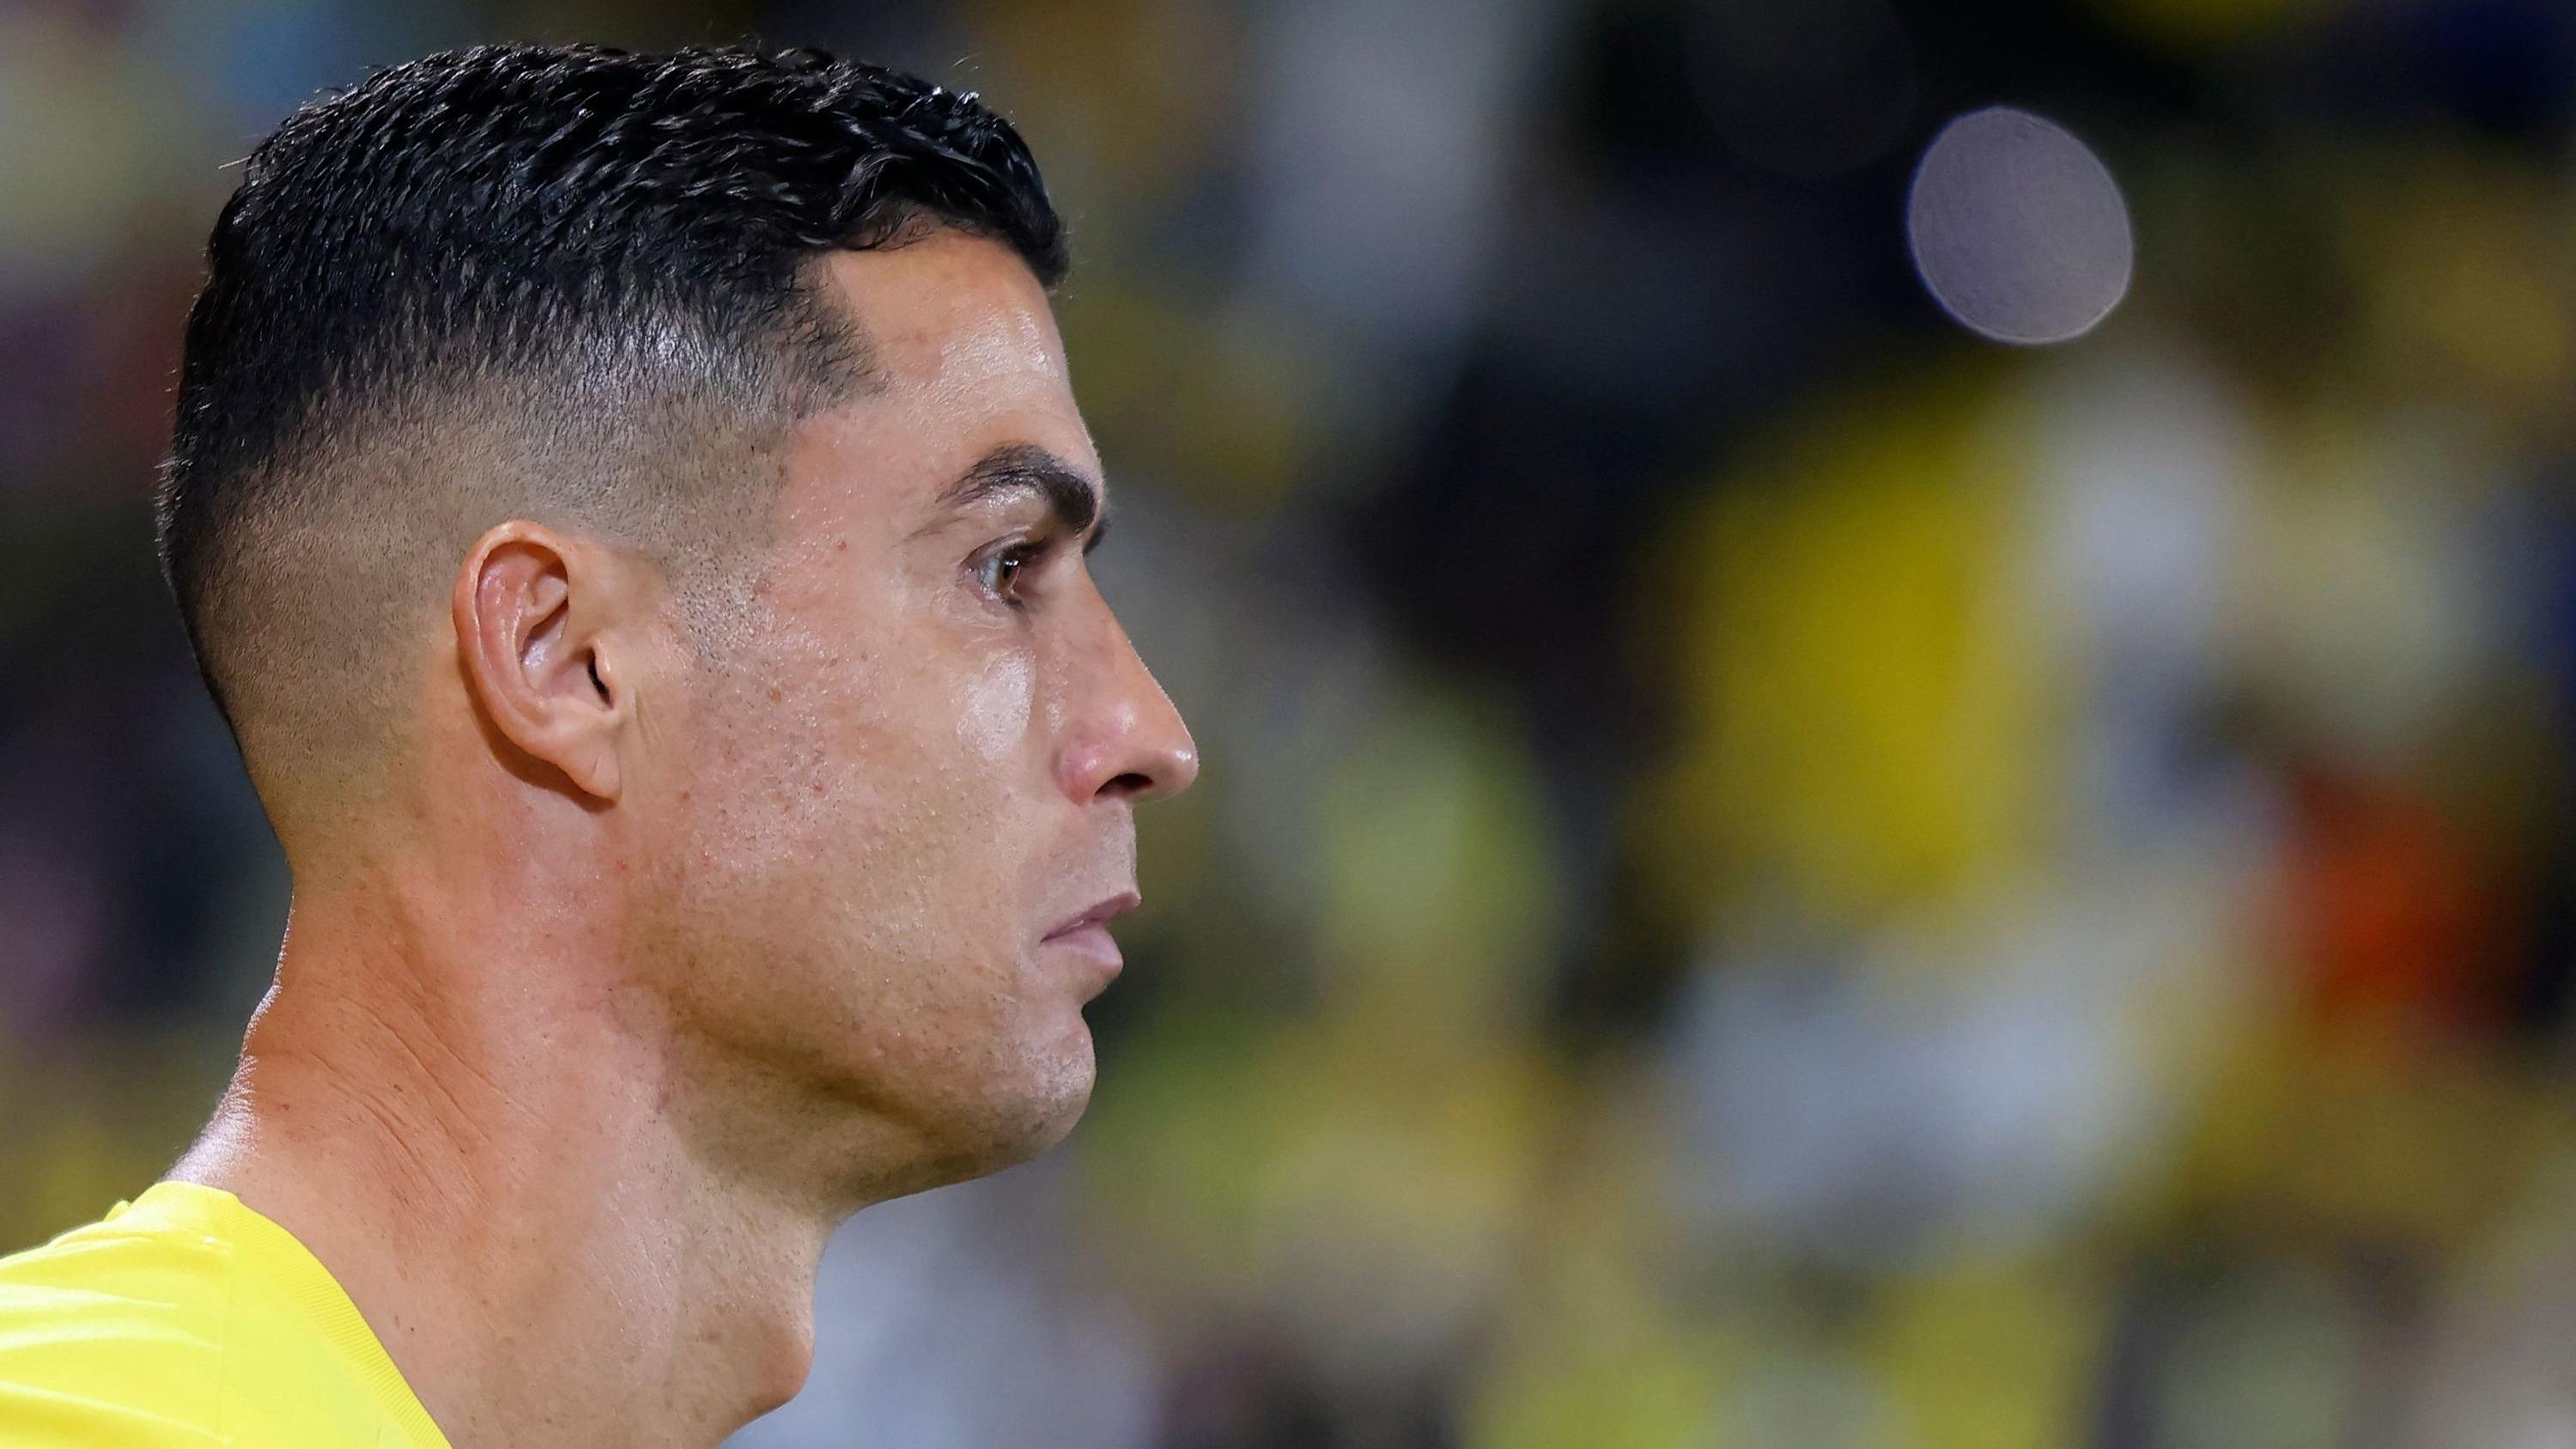 Football: Cristiano Ronaldo suspended for a match for an obscene gesture addressed to the public